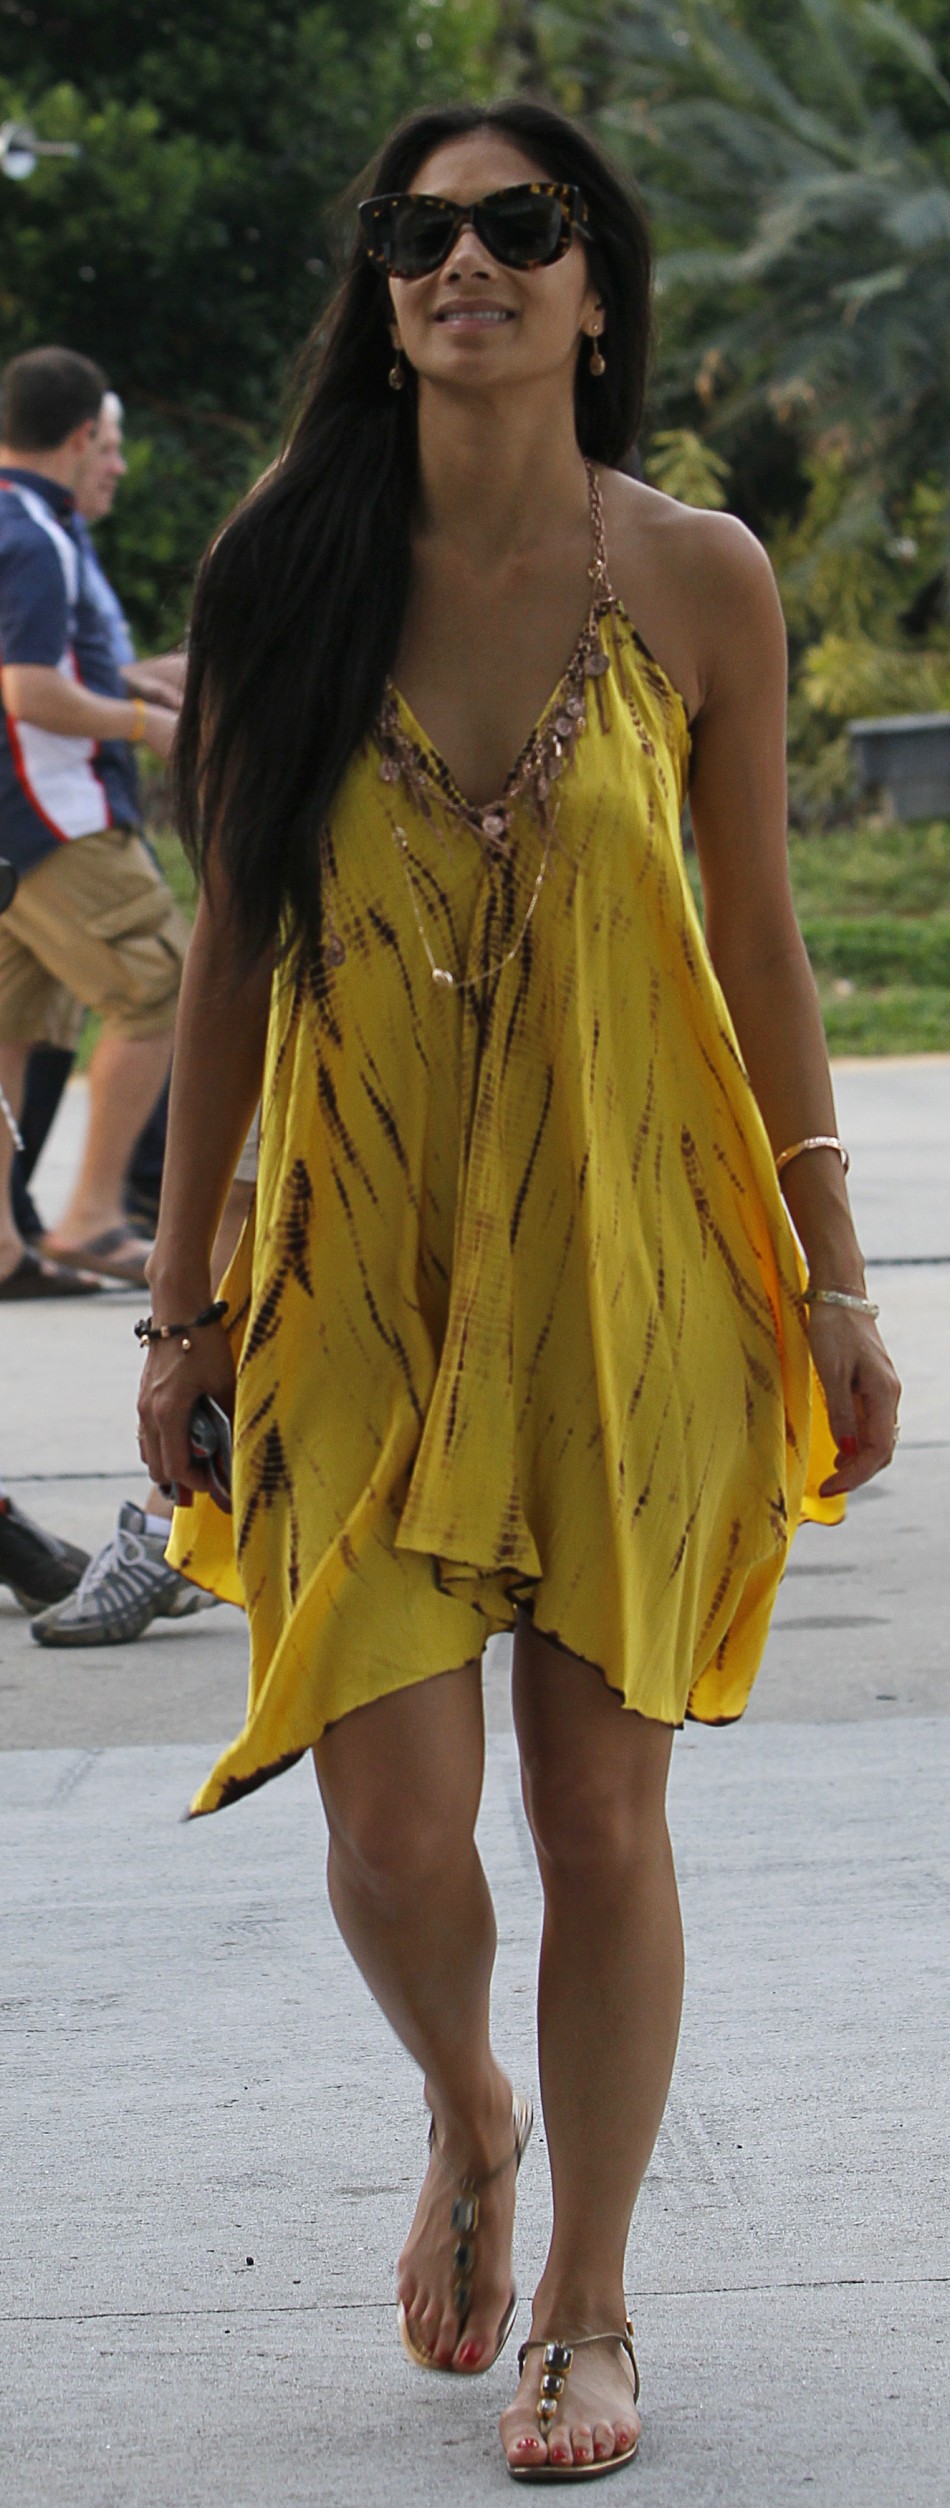 Nicole Scherzinger, girlfriend of McLarens driver Hamilton, walks in the paddock after the qualifying session of the Malaysian F1 Grand Prix at Sepang International Circuit